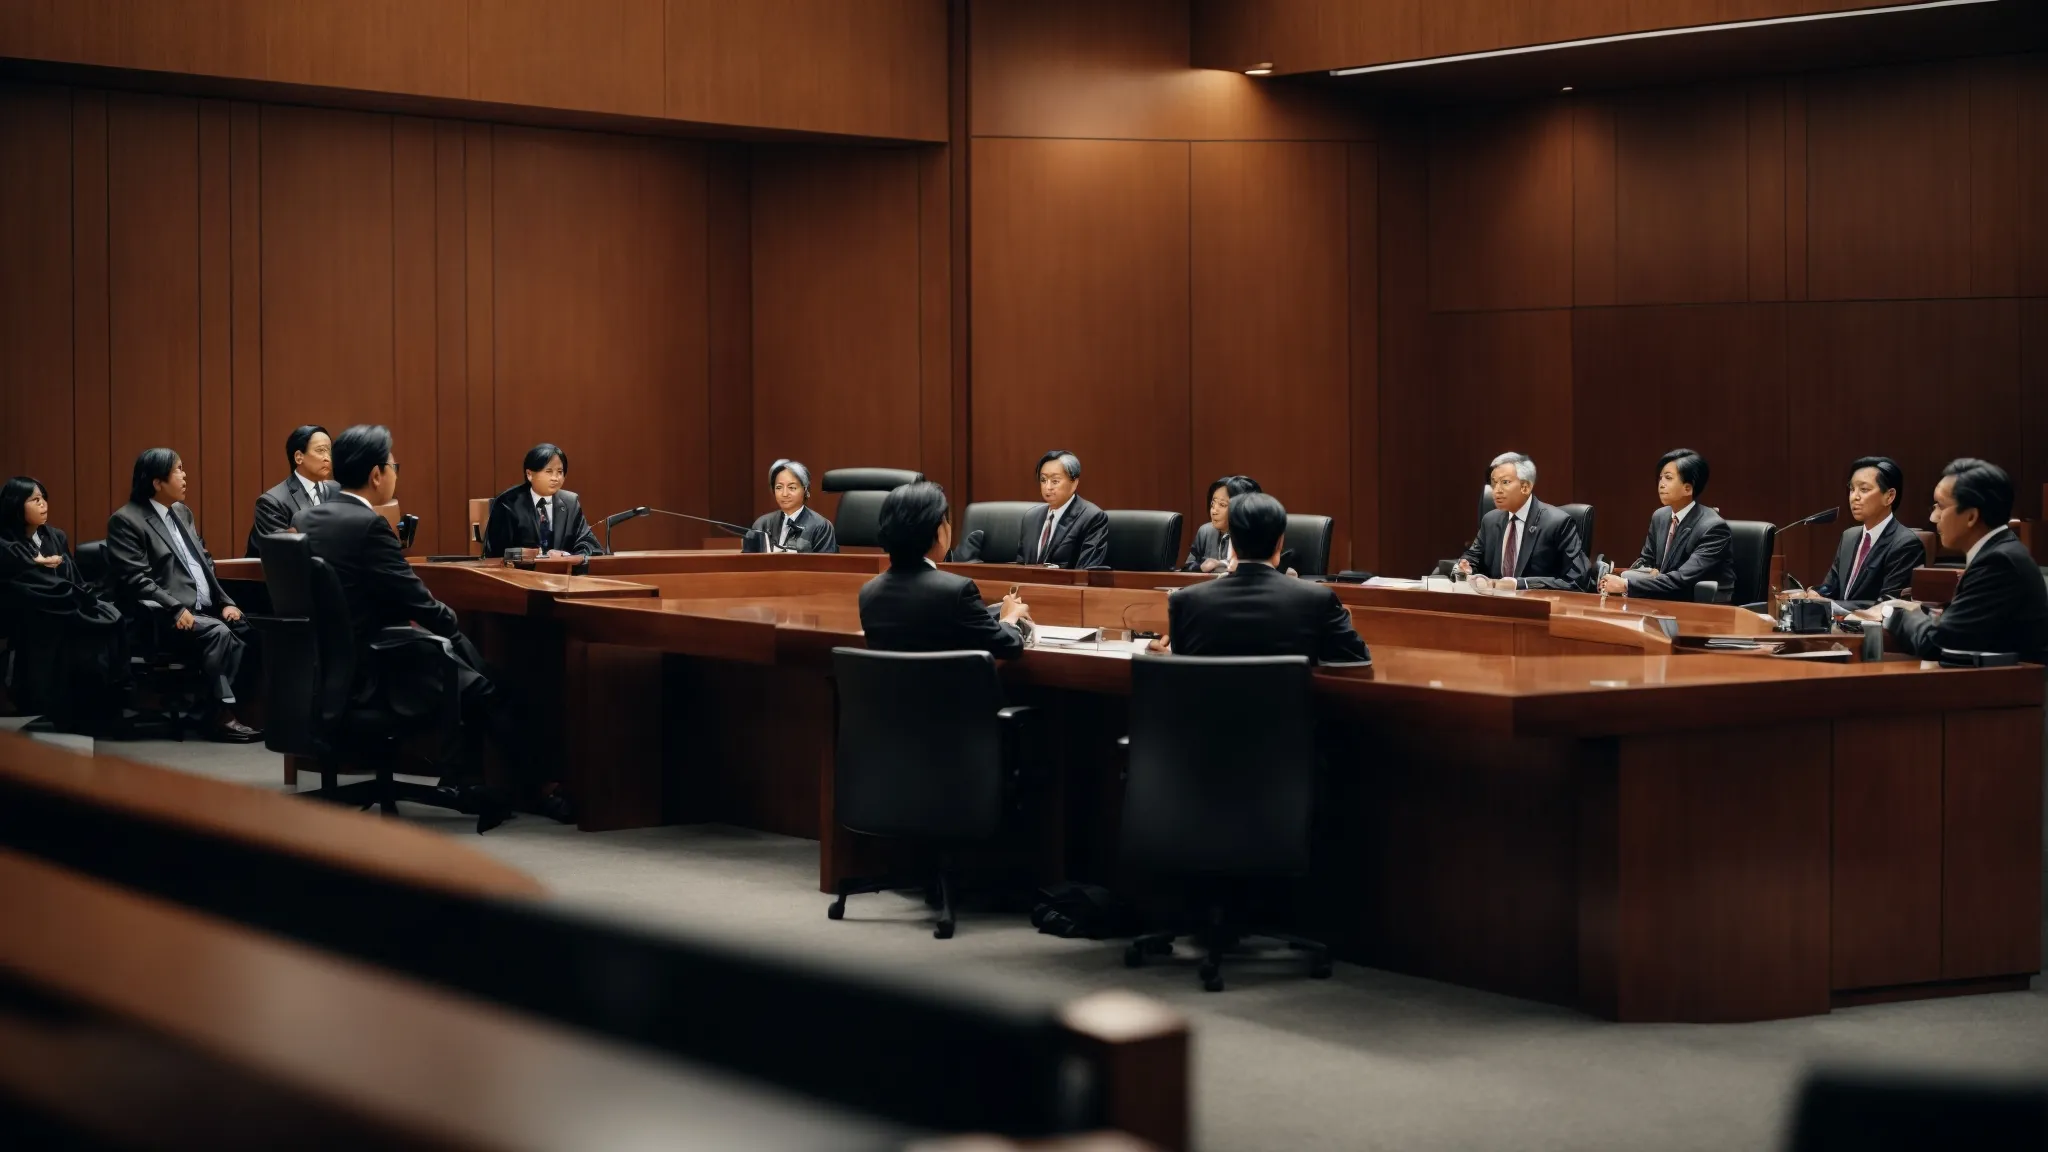 a grand, modern courtroom with a diverse panel of arbitrators presiding over a high-stakes international investment dispute.